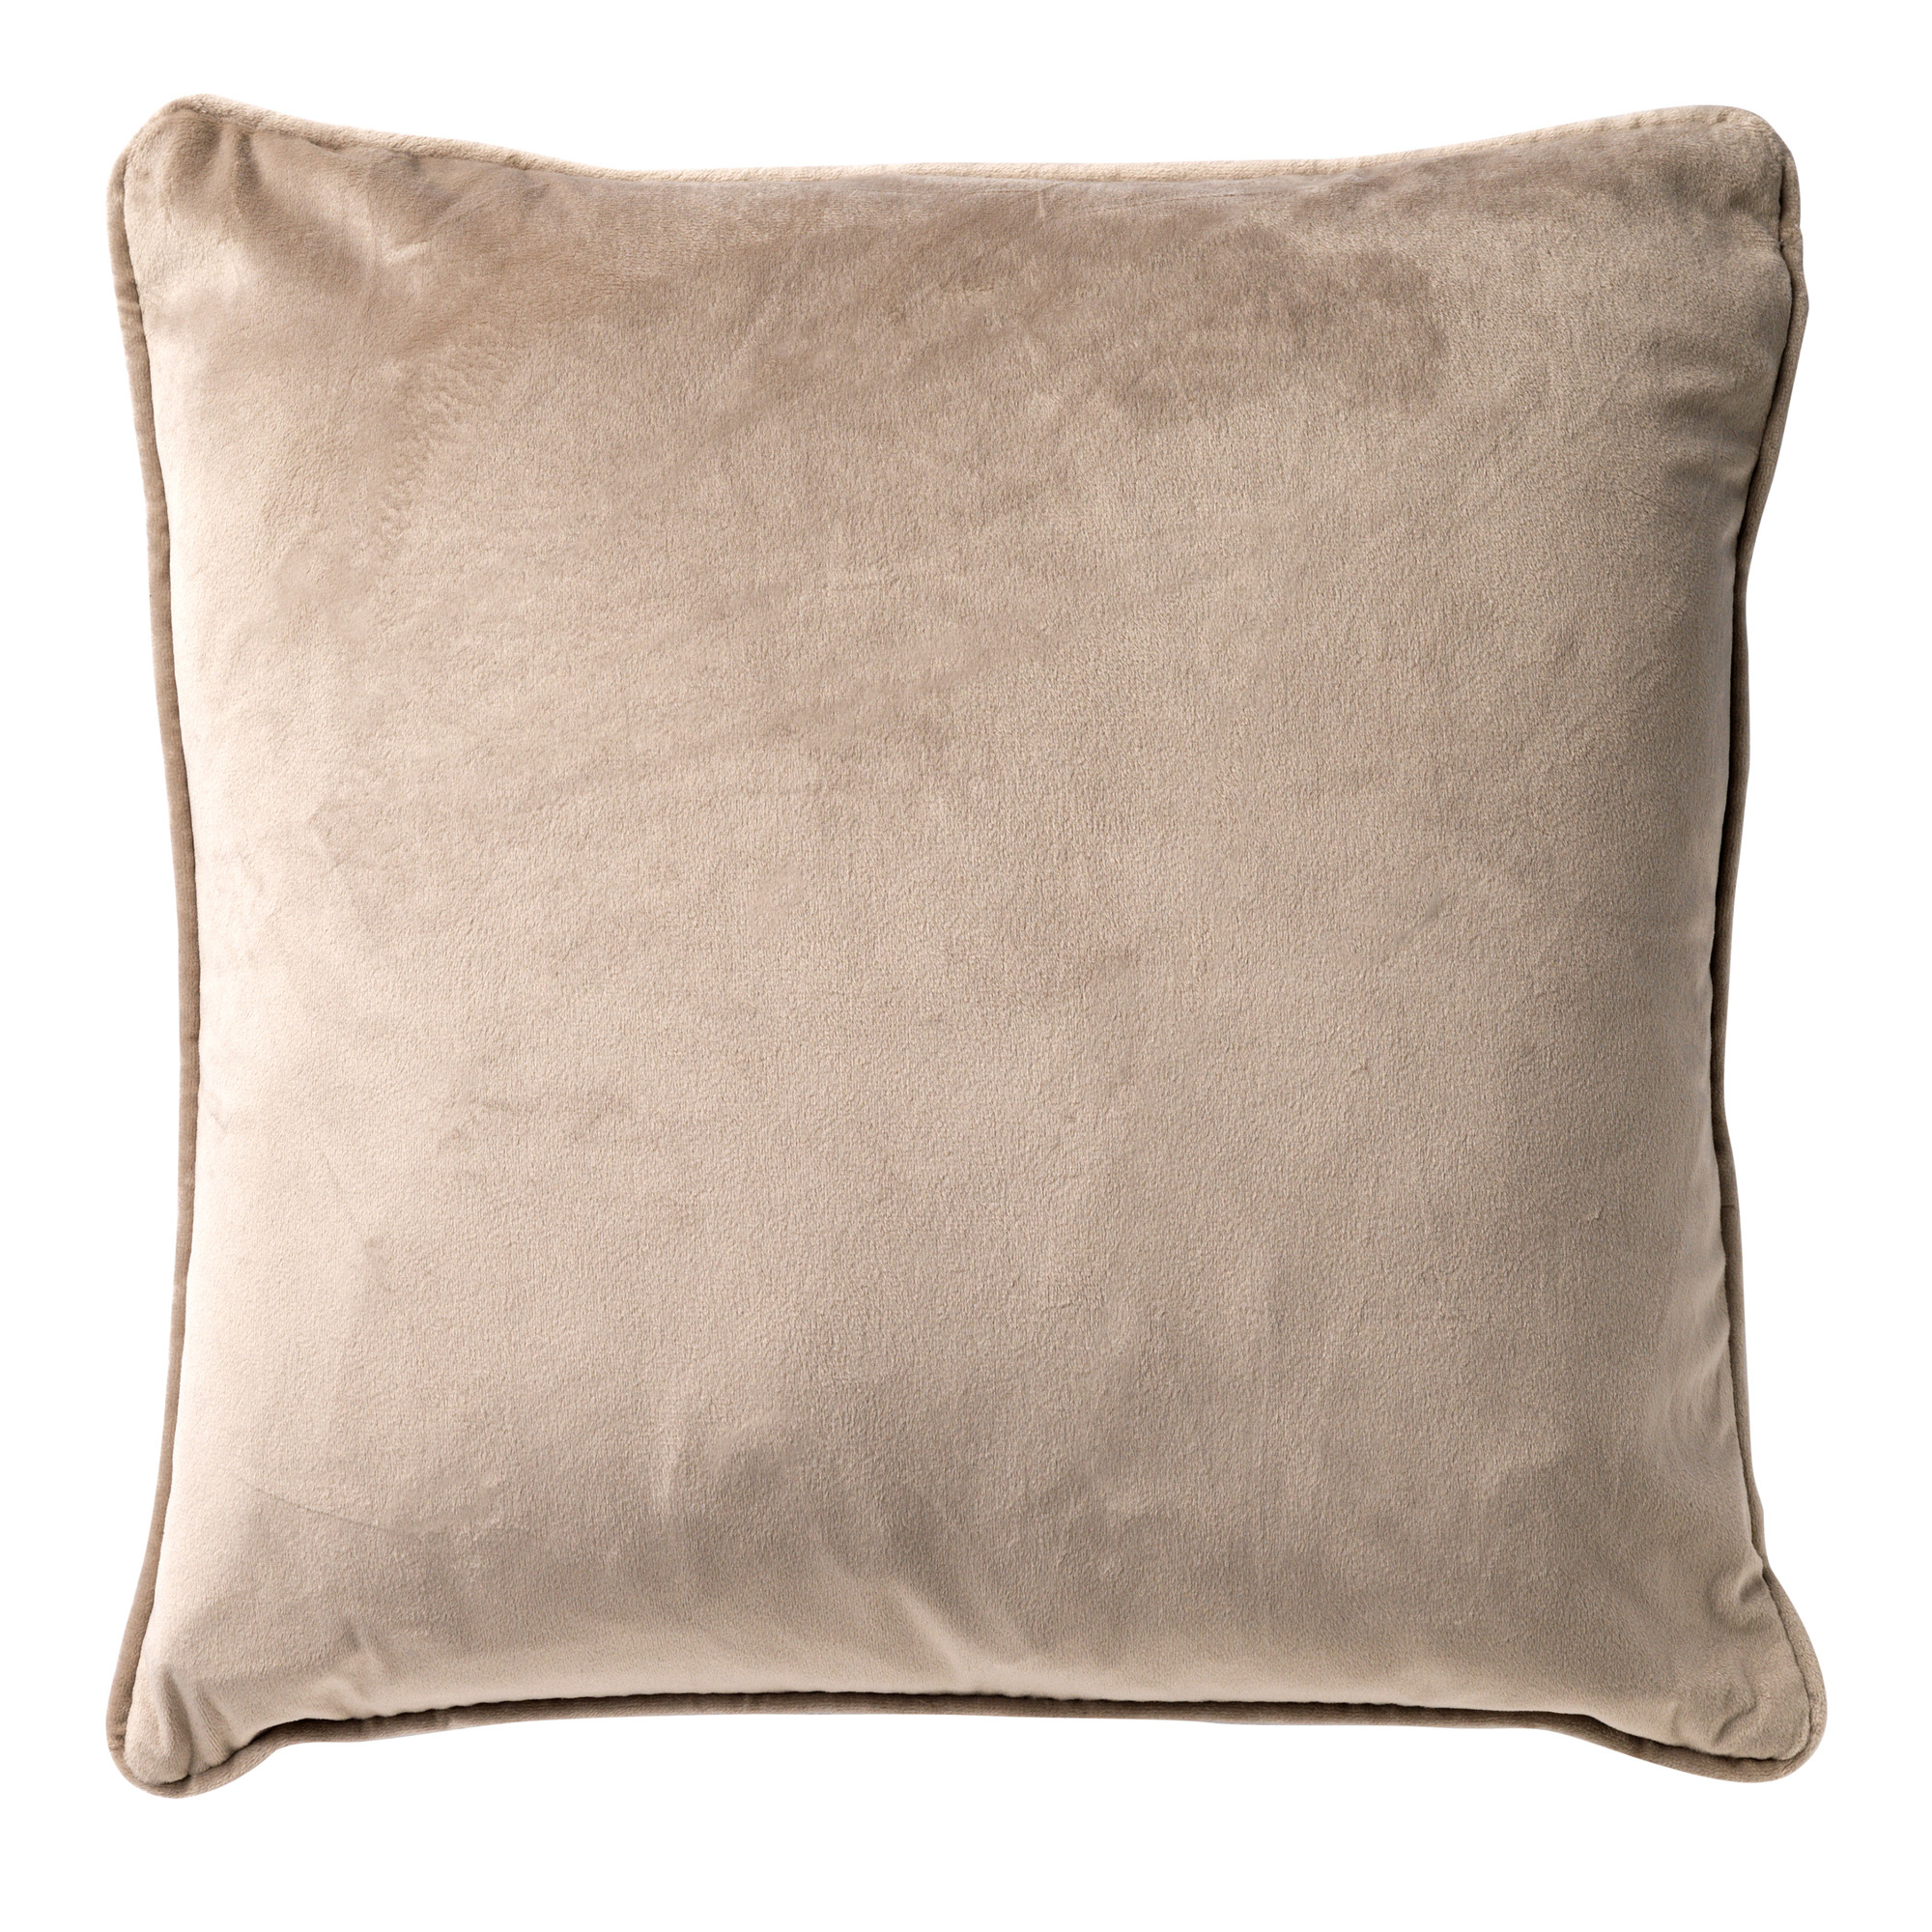 FINNA - Cushion with cushion cover made of 100% recycled polyester - Eco Line collection 45x45 cm - Pumice Stone - beige